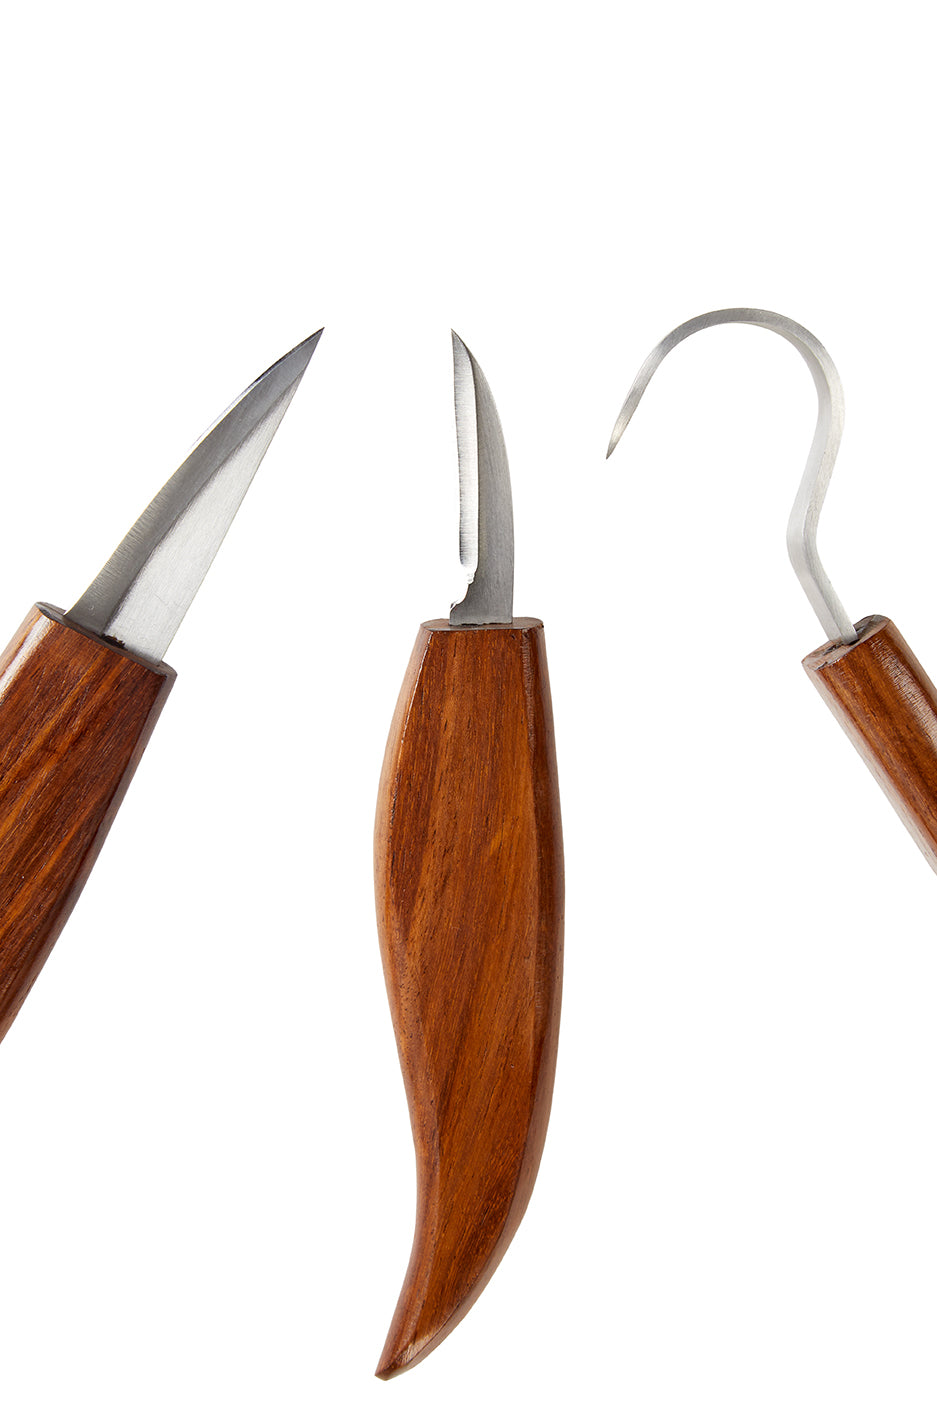 3 Piece Carving Knife Set with Leather Roll